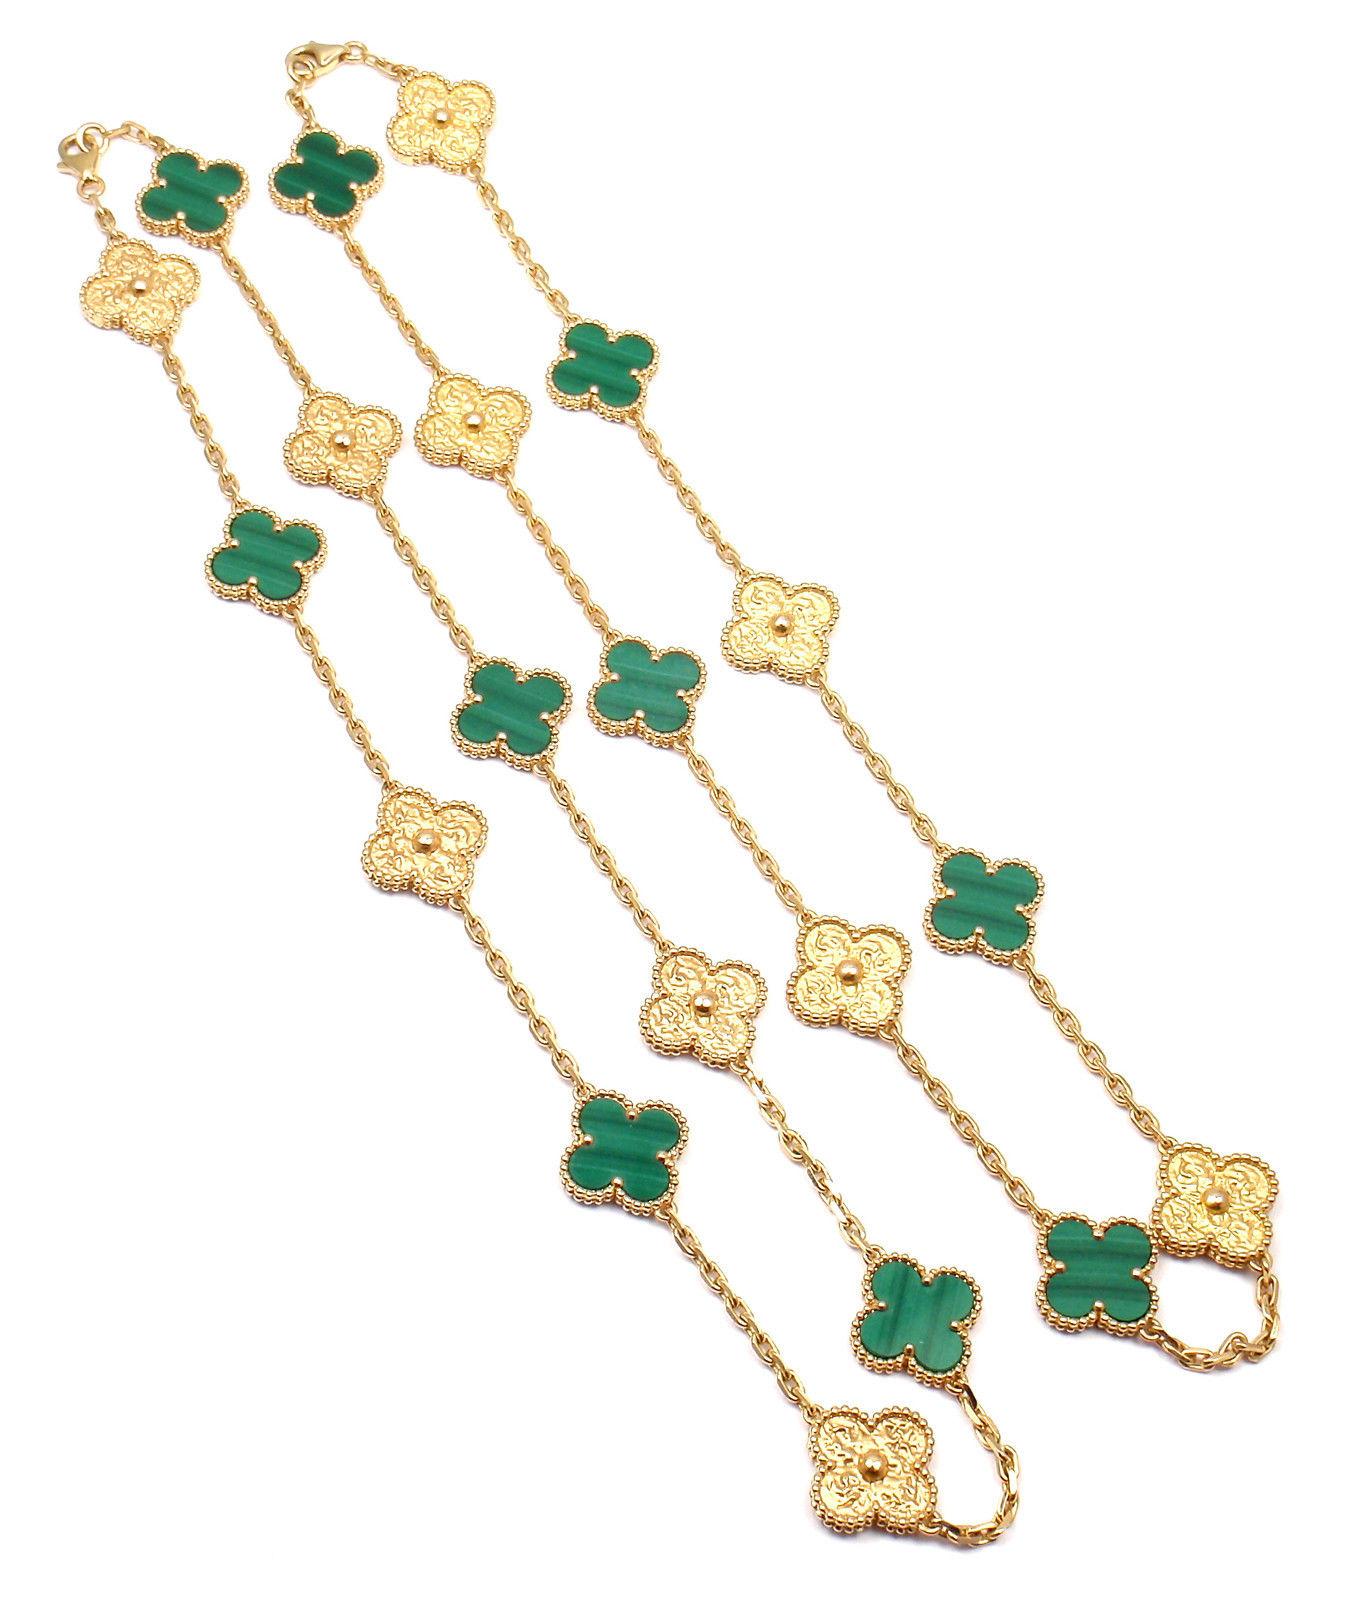 18k Yellow Gold Set Of 2 Vintage Alhambra Ten-Motif Each Malachite Special Necklaces by Van Cleef & Arpels. 
With 5 motifs of Malachite Stone And 5 Motifs of Yellow Gold Alhambras, 15mm each, 2 necklaces x 10 motifs each.
Each necklace is numbered,